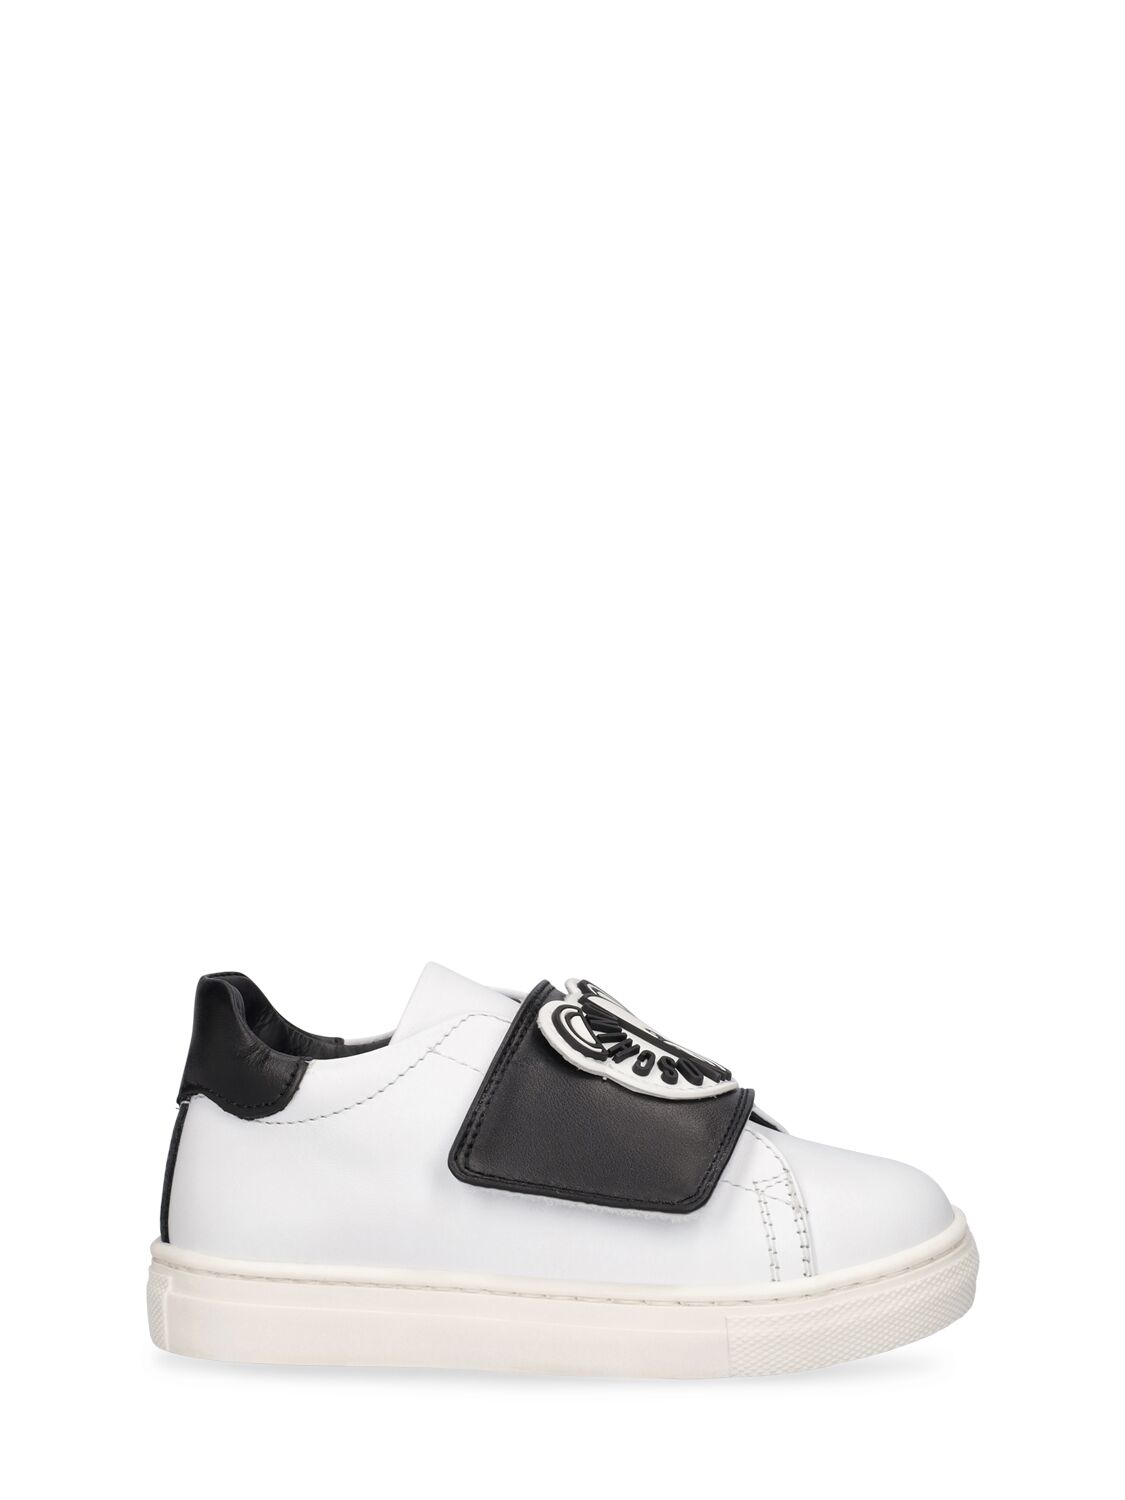 Moschino Kids' Leather Strap Sneakers W/ Patches In White,black